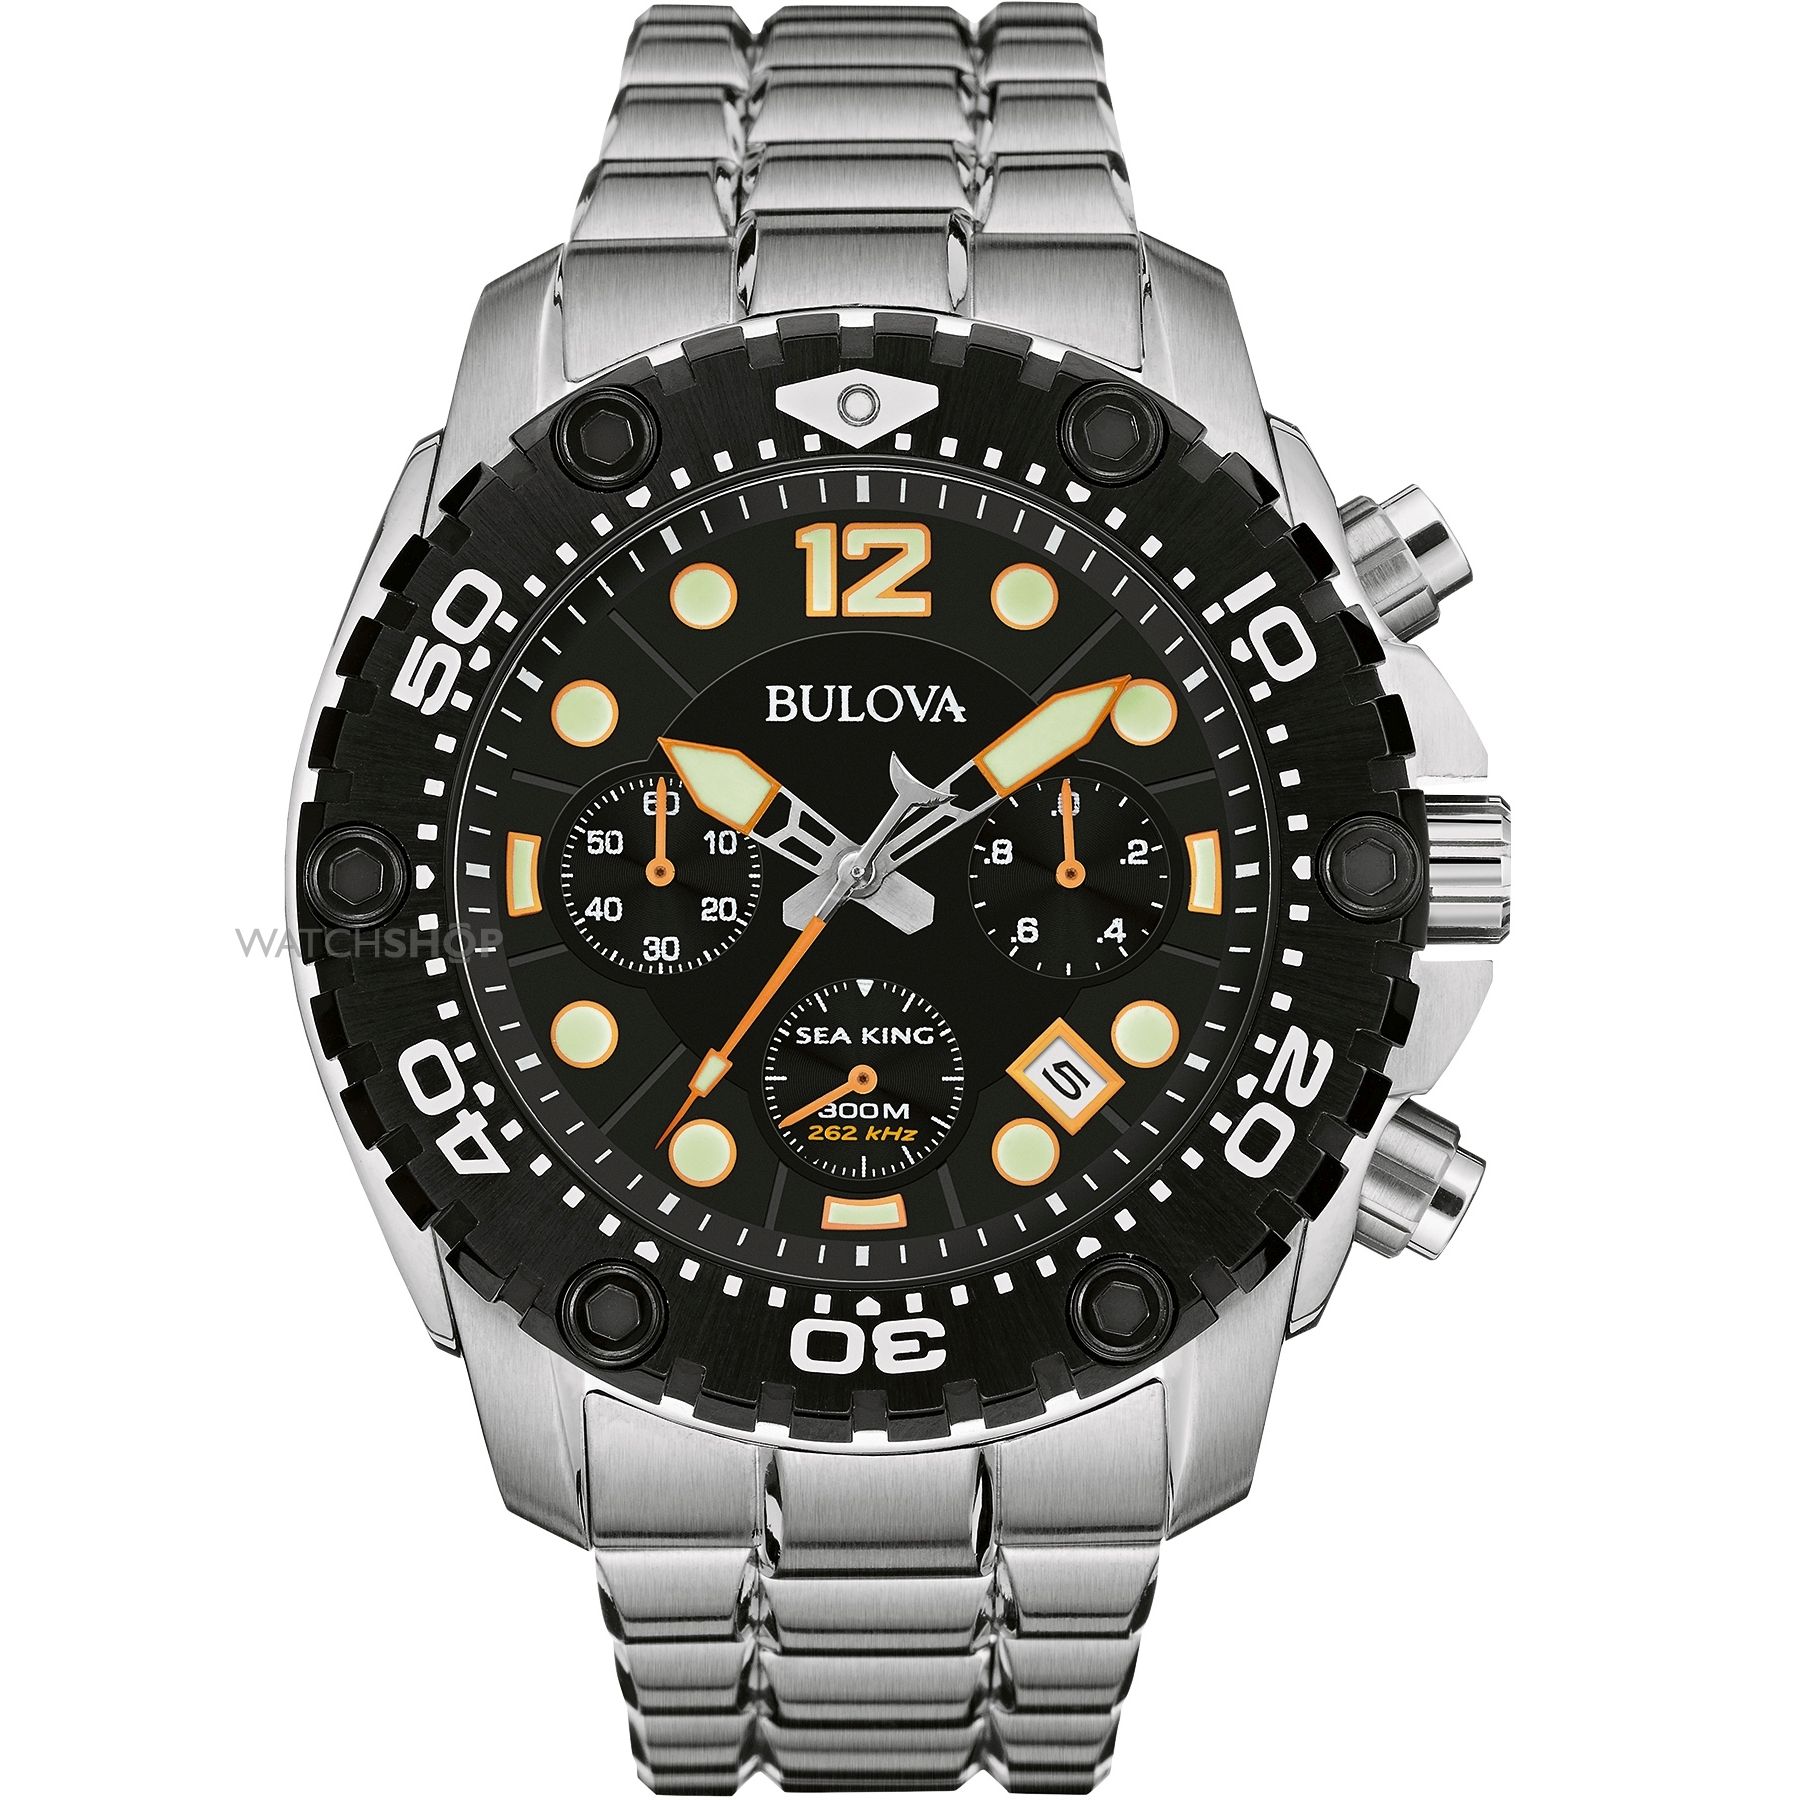 Bulova Sea King Men's UHF Watch with Black Dial Analogue Display and Silver Stainless Steel Bracelet 98B244